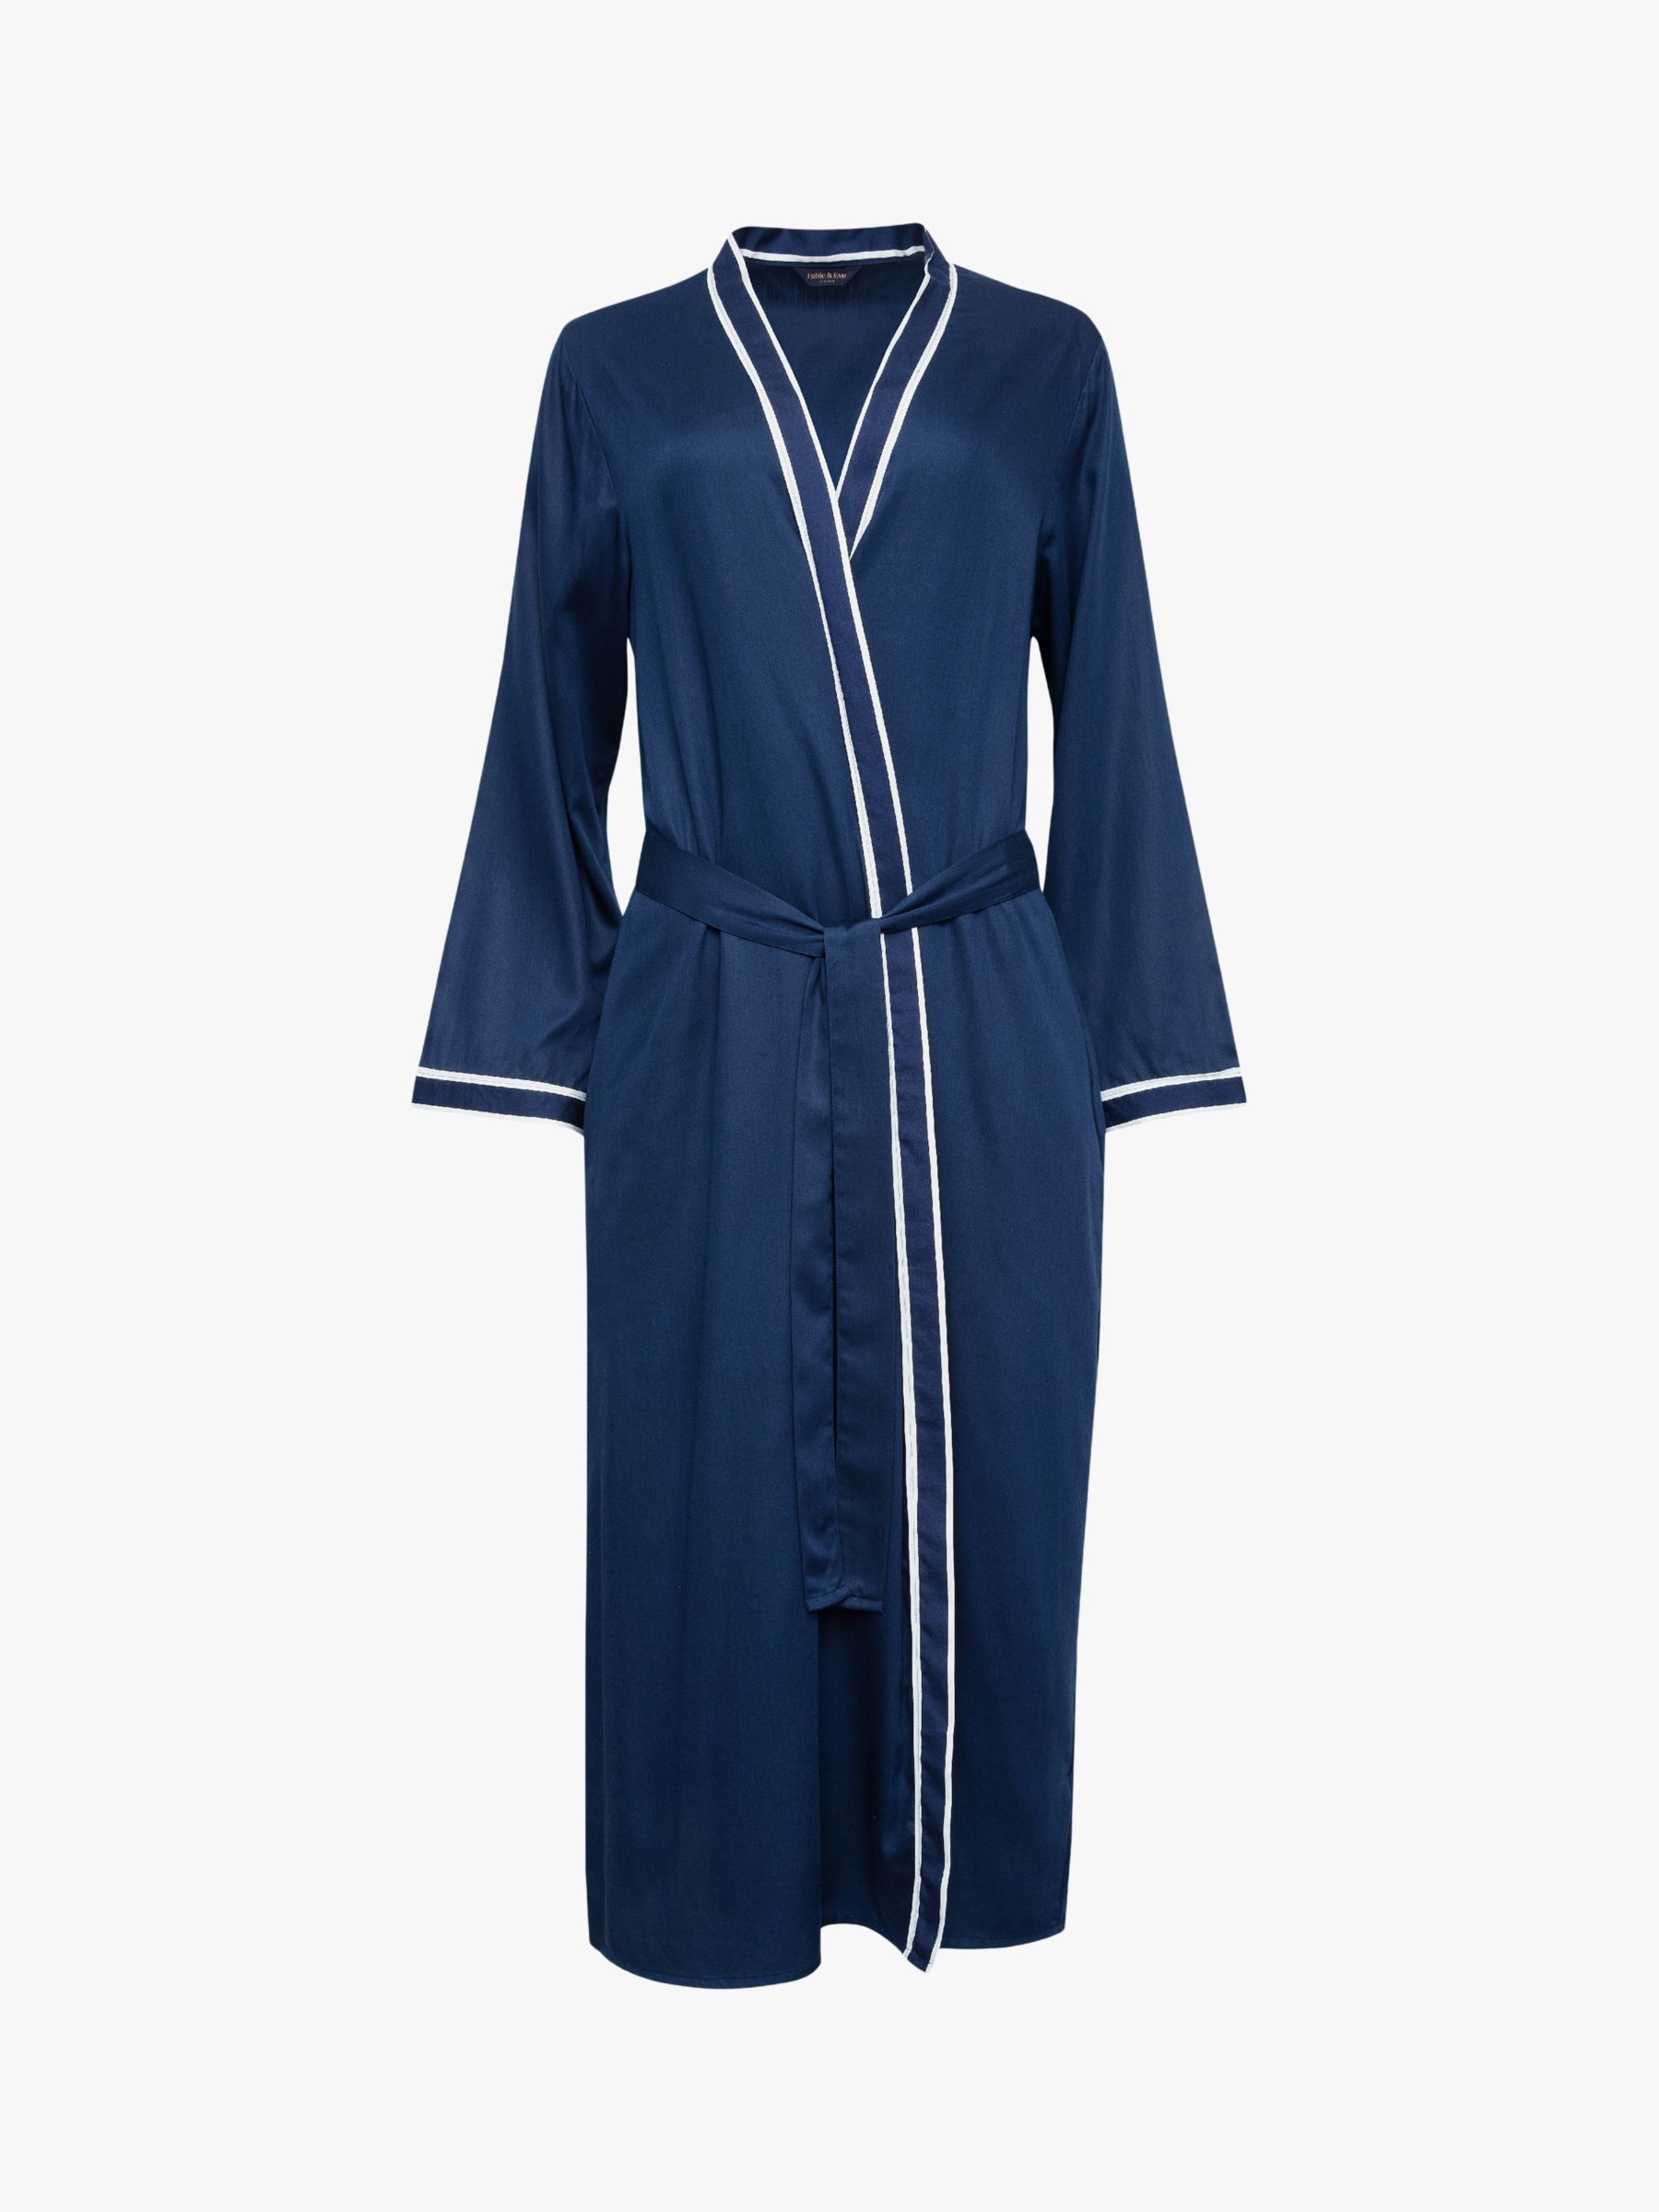 Fable & Eve Notting Hill Dressing Gown, Navy at John Lewis & Partners